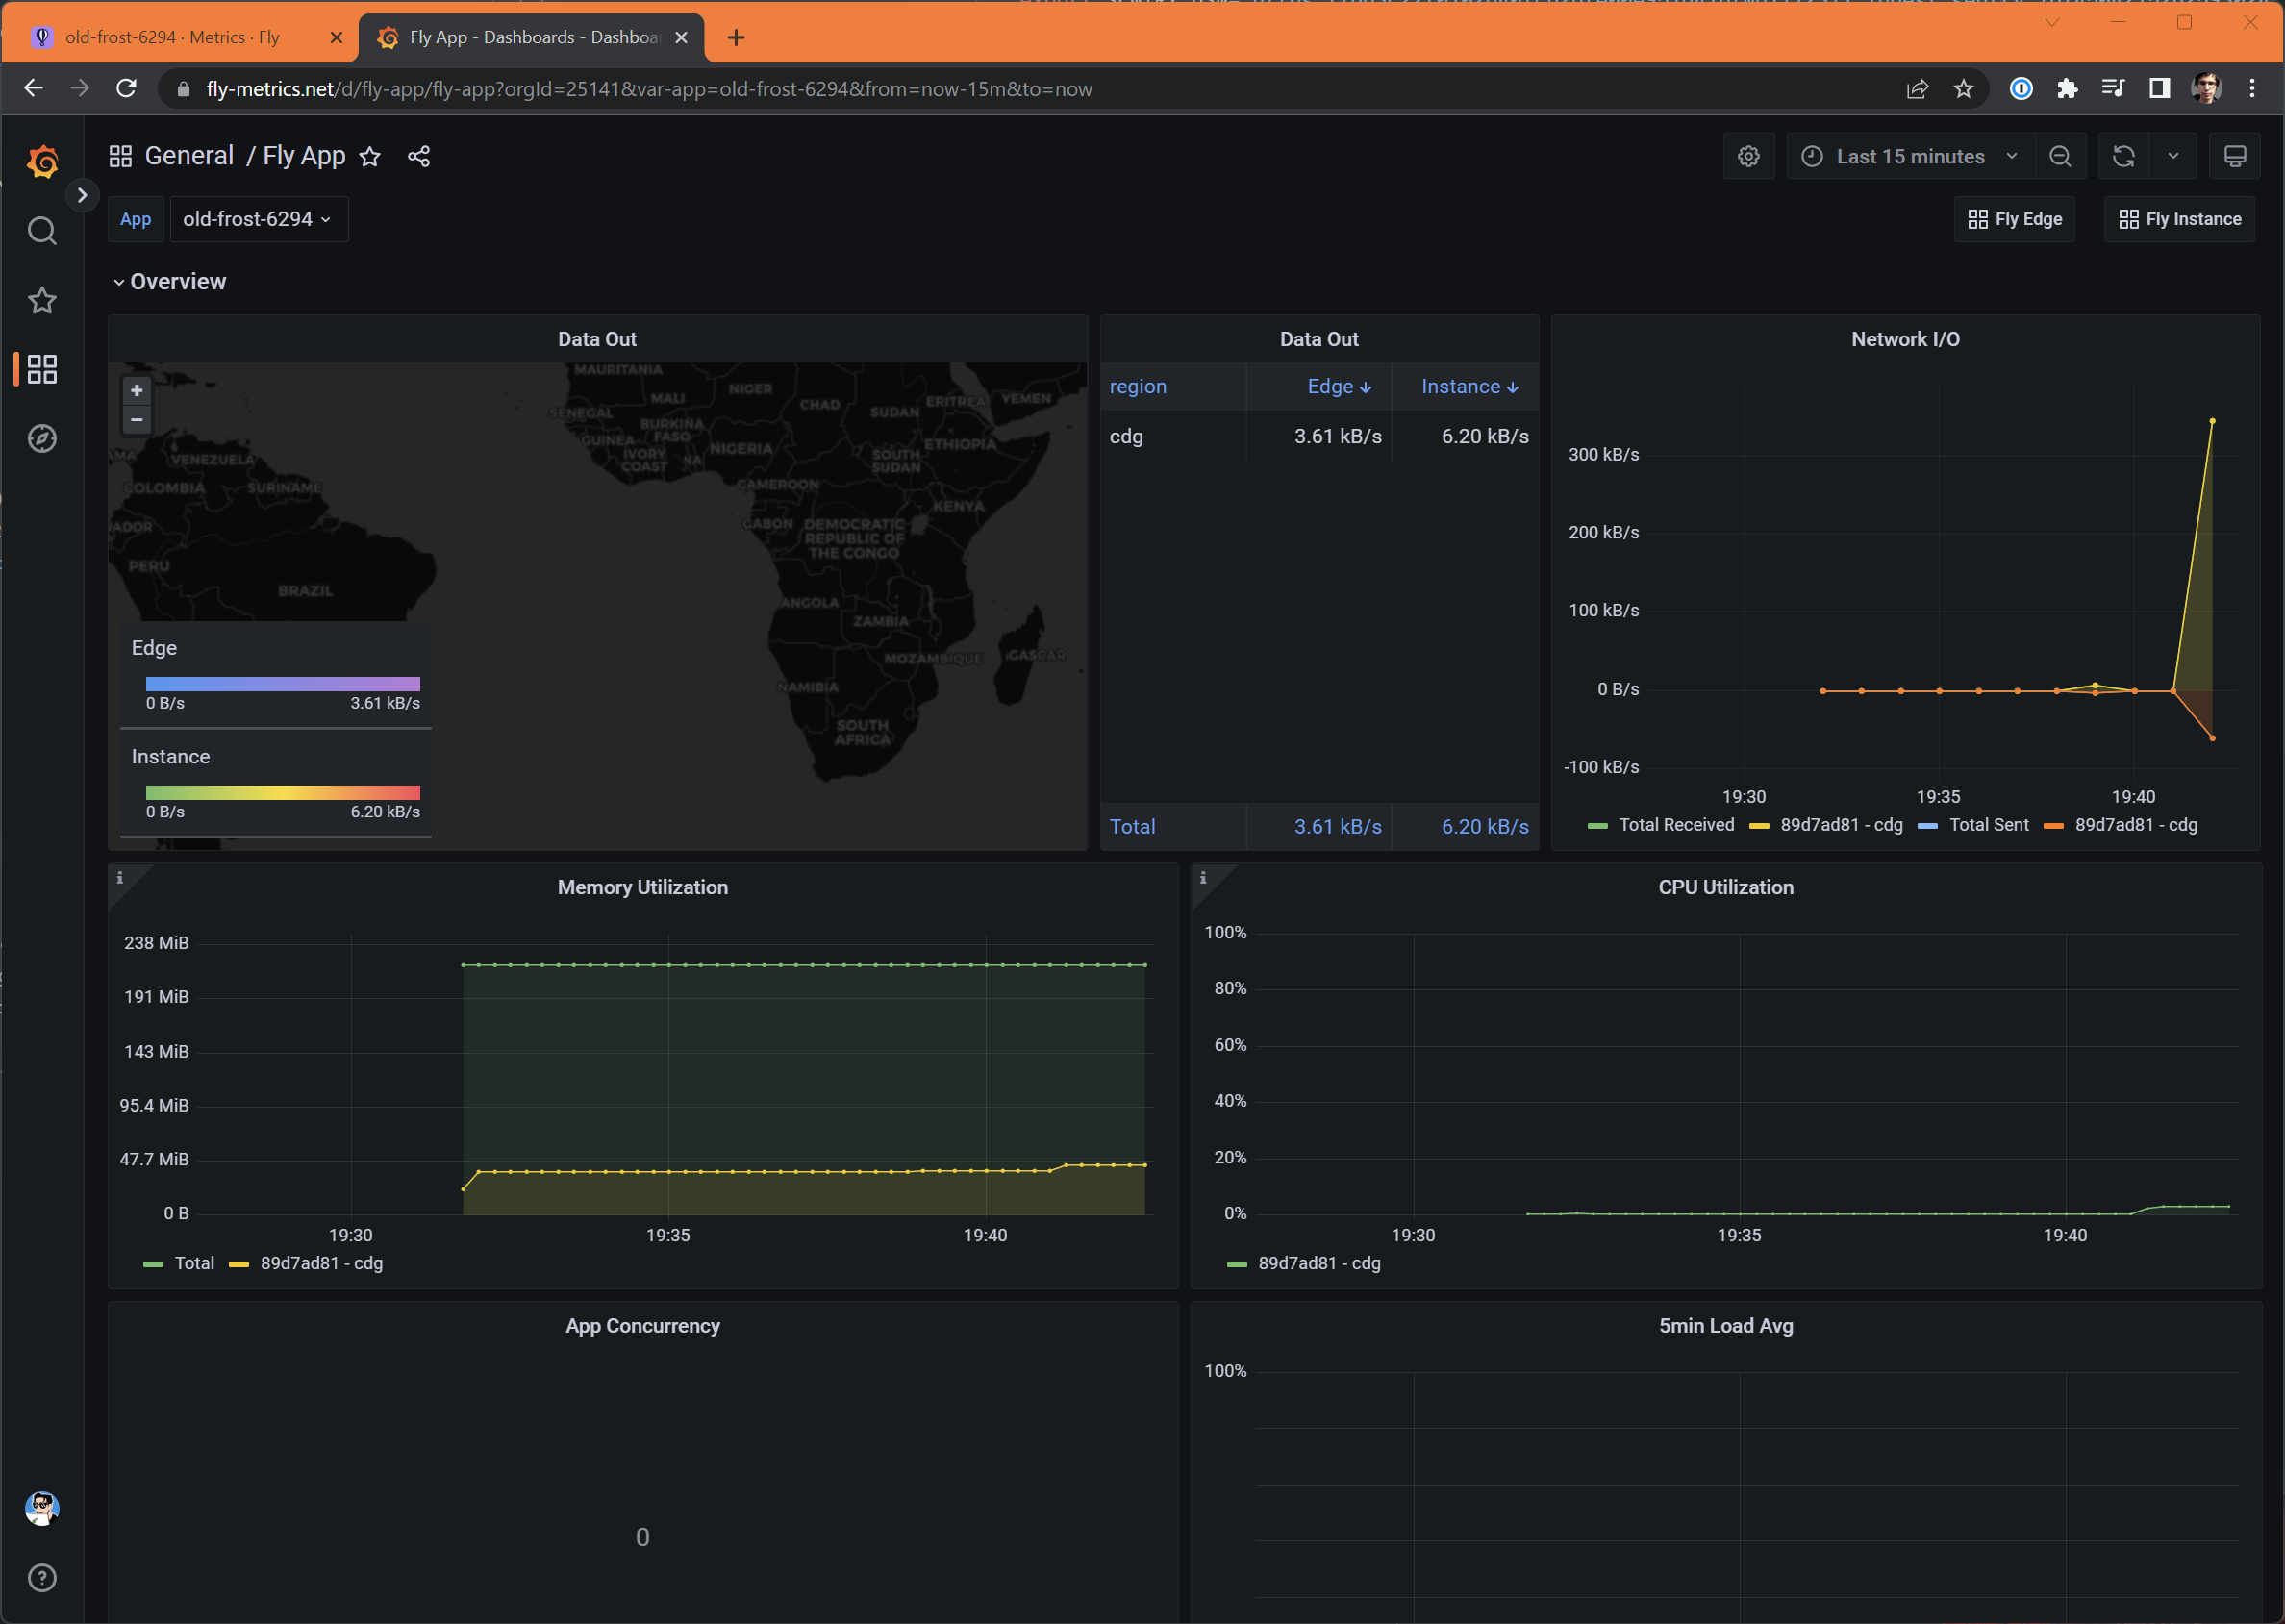 fly-hosted Grafana screenshot, showing a world map and list of regions+traffic for Data Out, a Network I/O graph with separate input/output metrics, memory utilization and CPU utilization